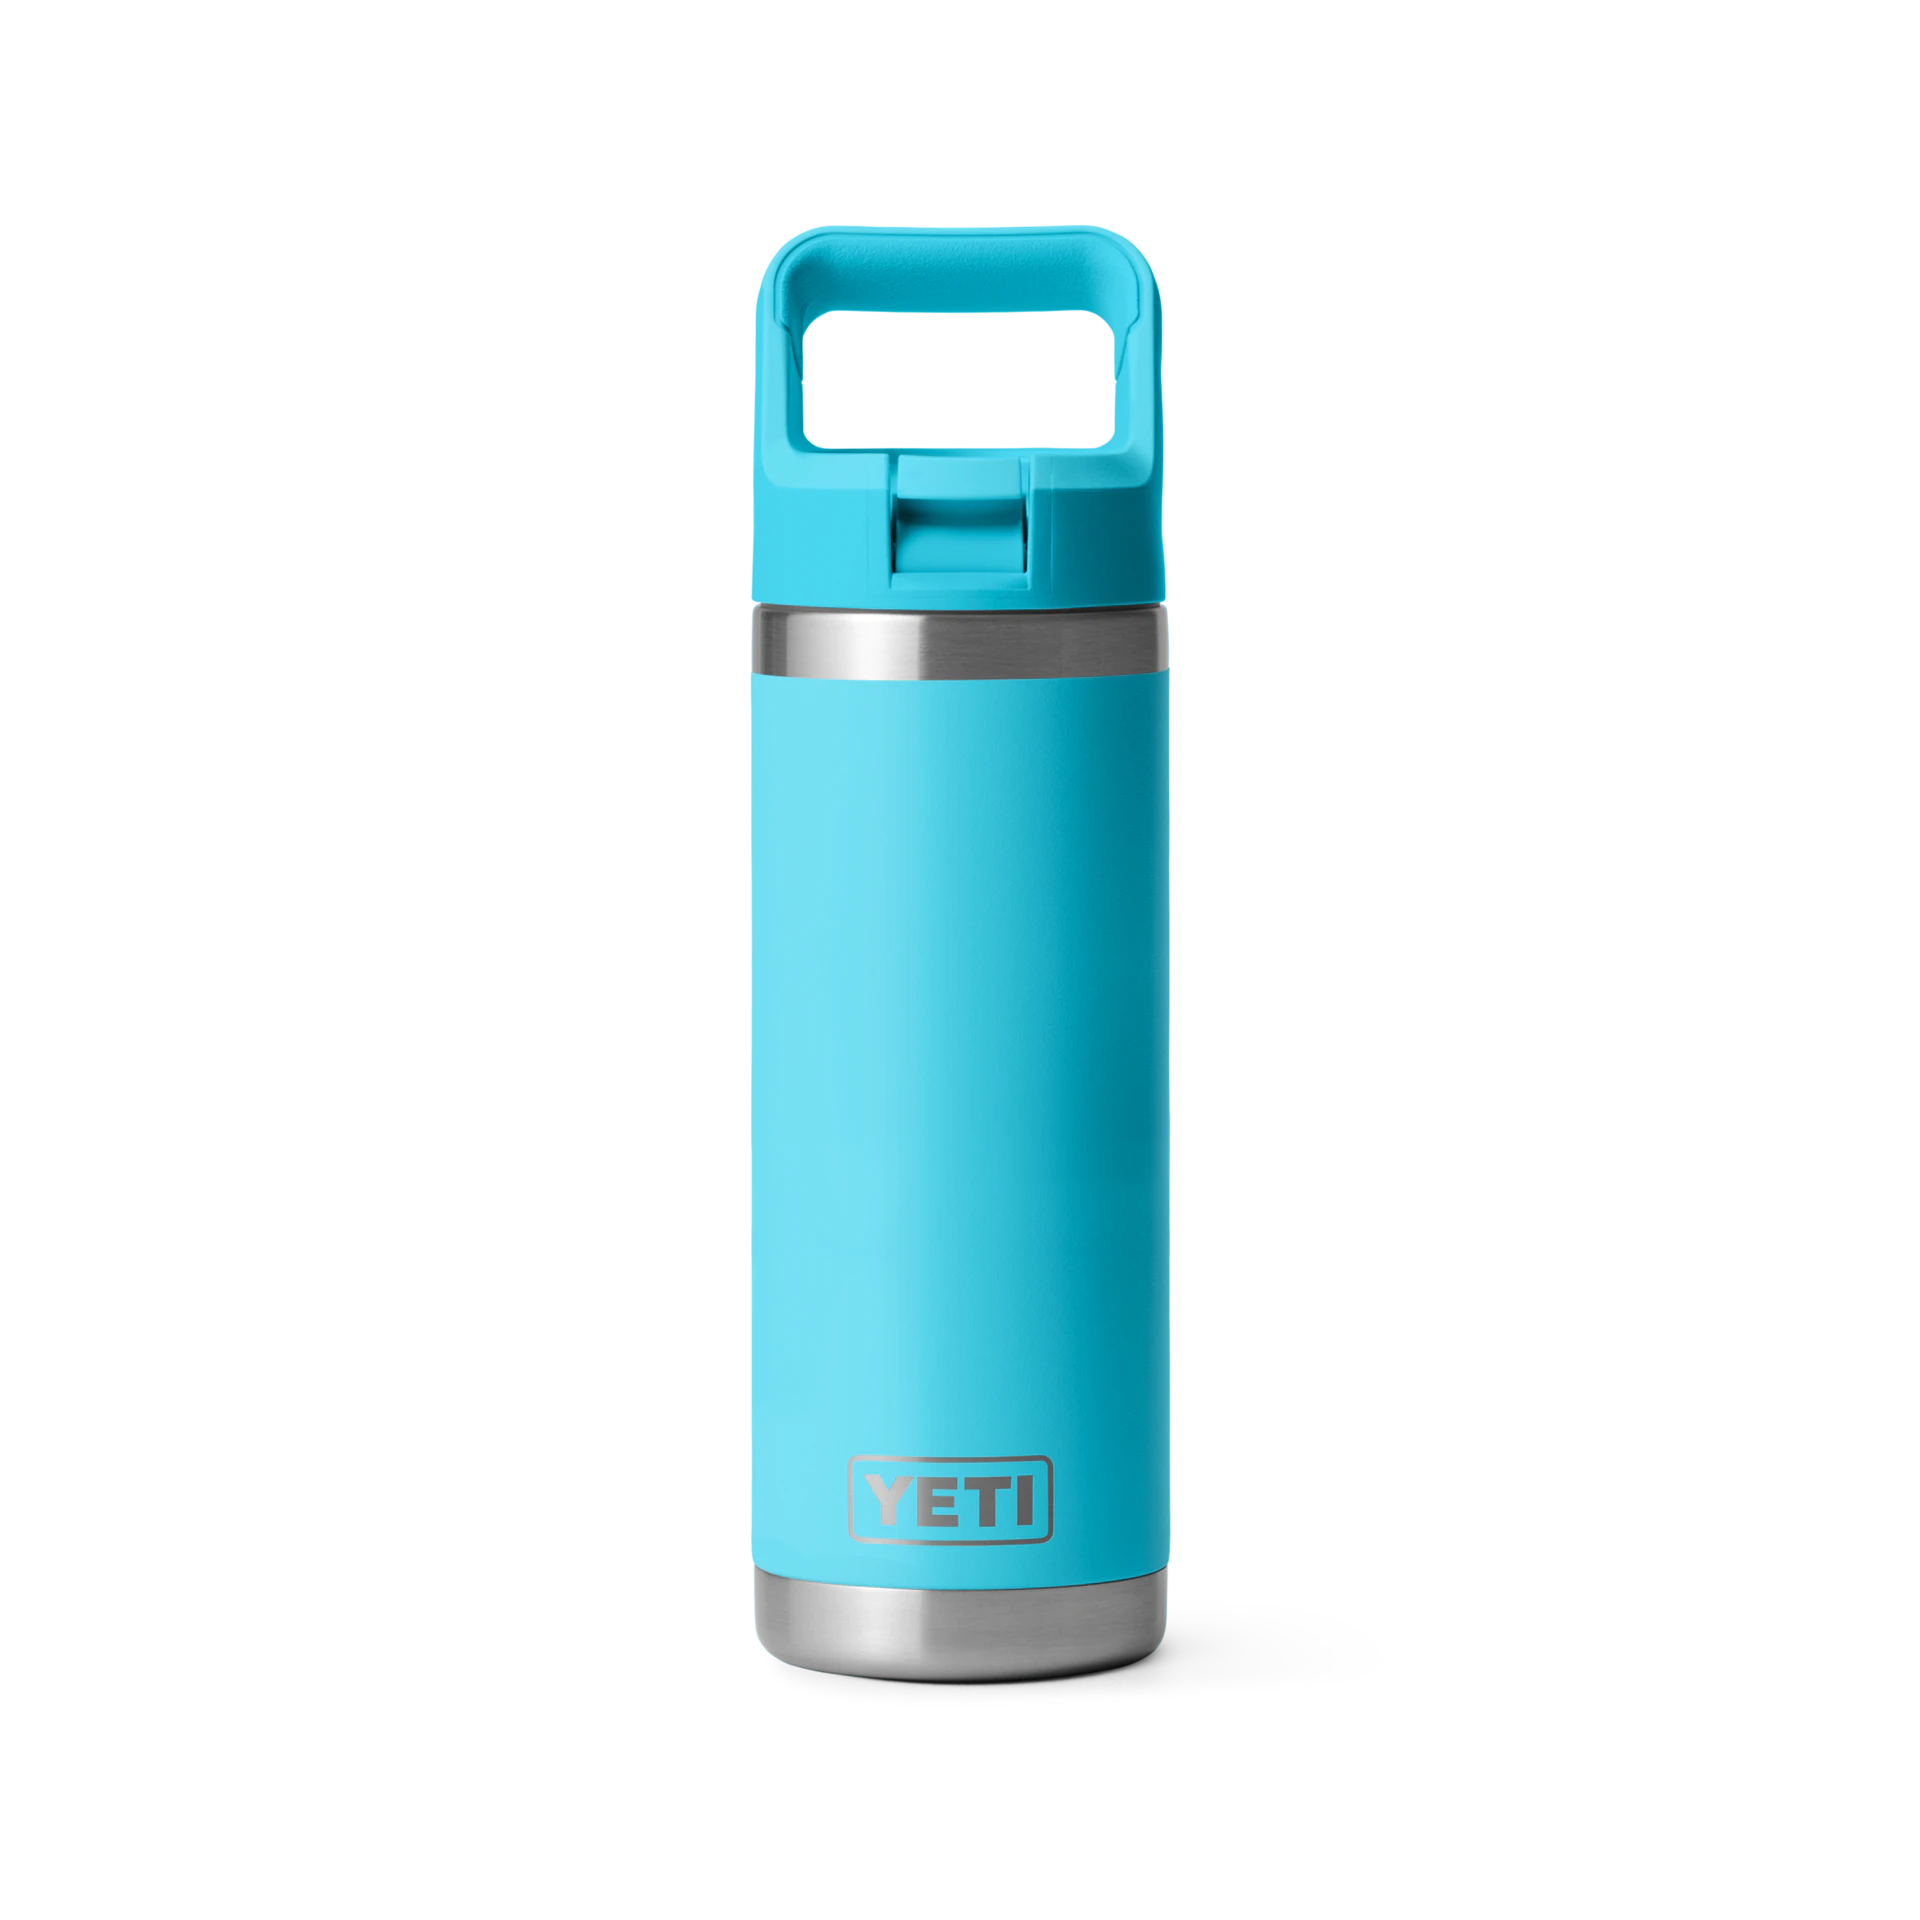 Yeti - Rambler - 18 oz Bottle with Colour Matched Straw Cap (532ml